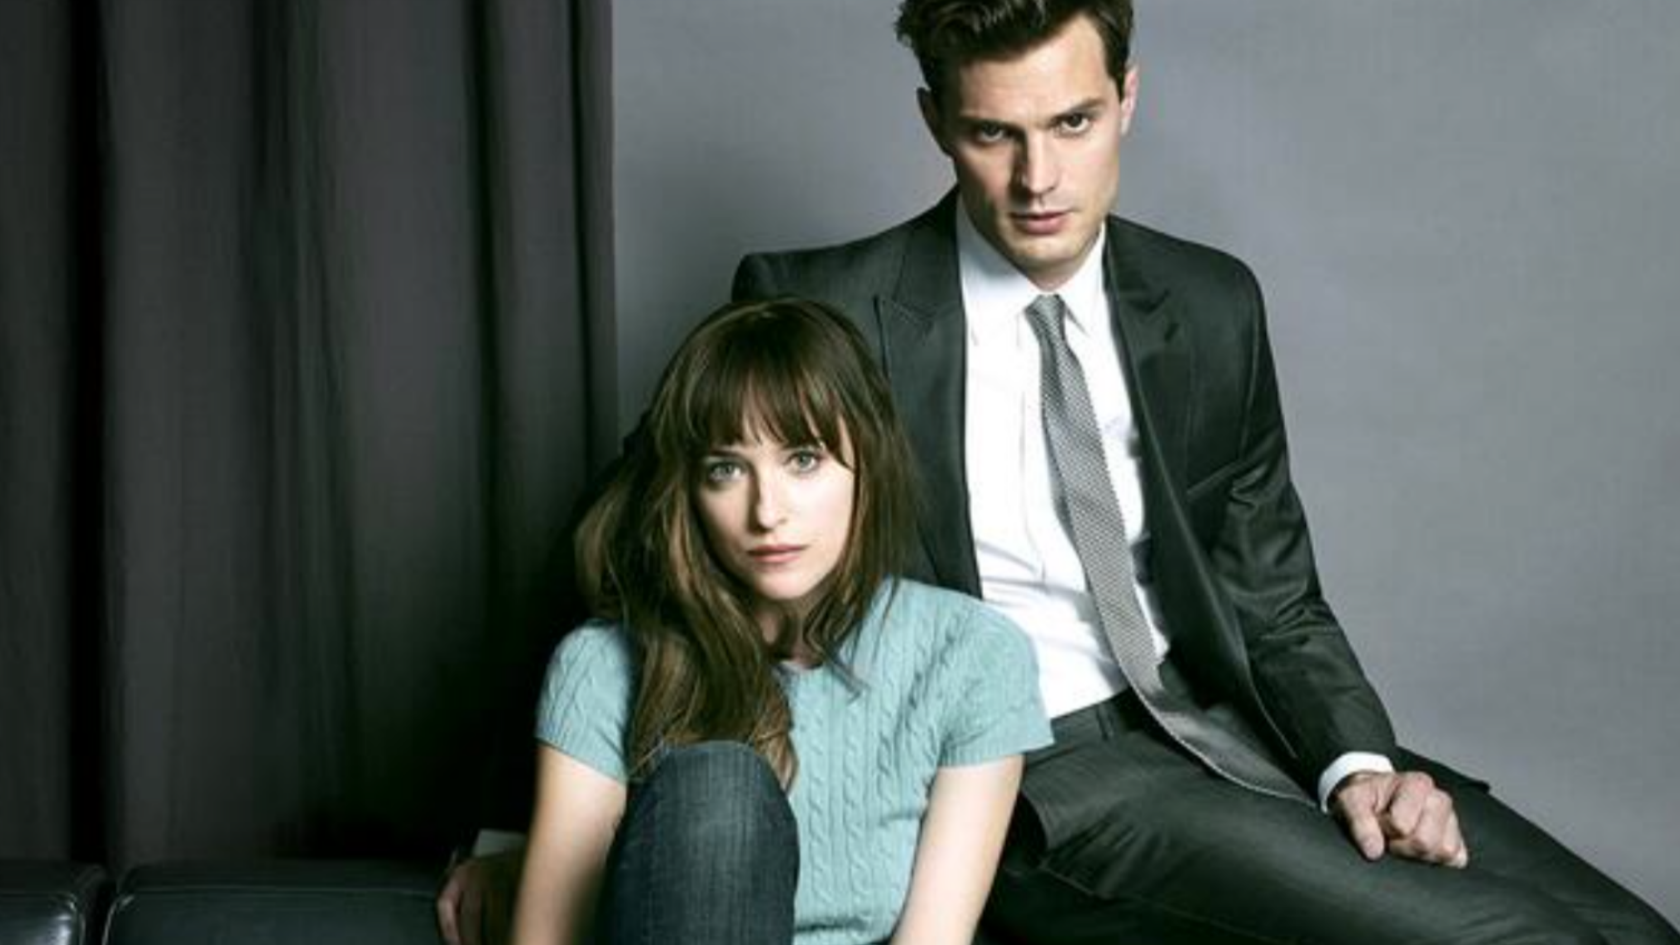 Watch The First Full Scene From The 'Fifty Shades Of Grey' Film